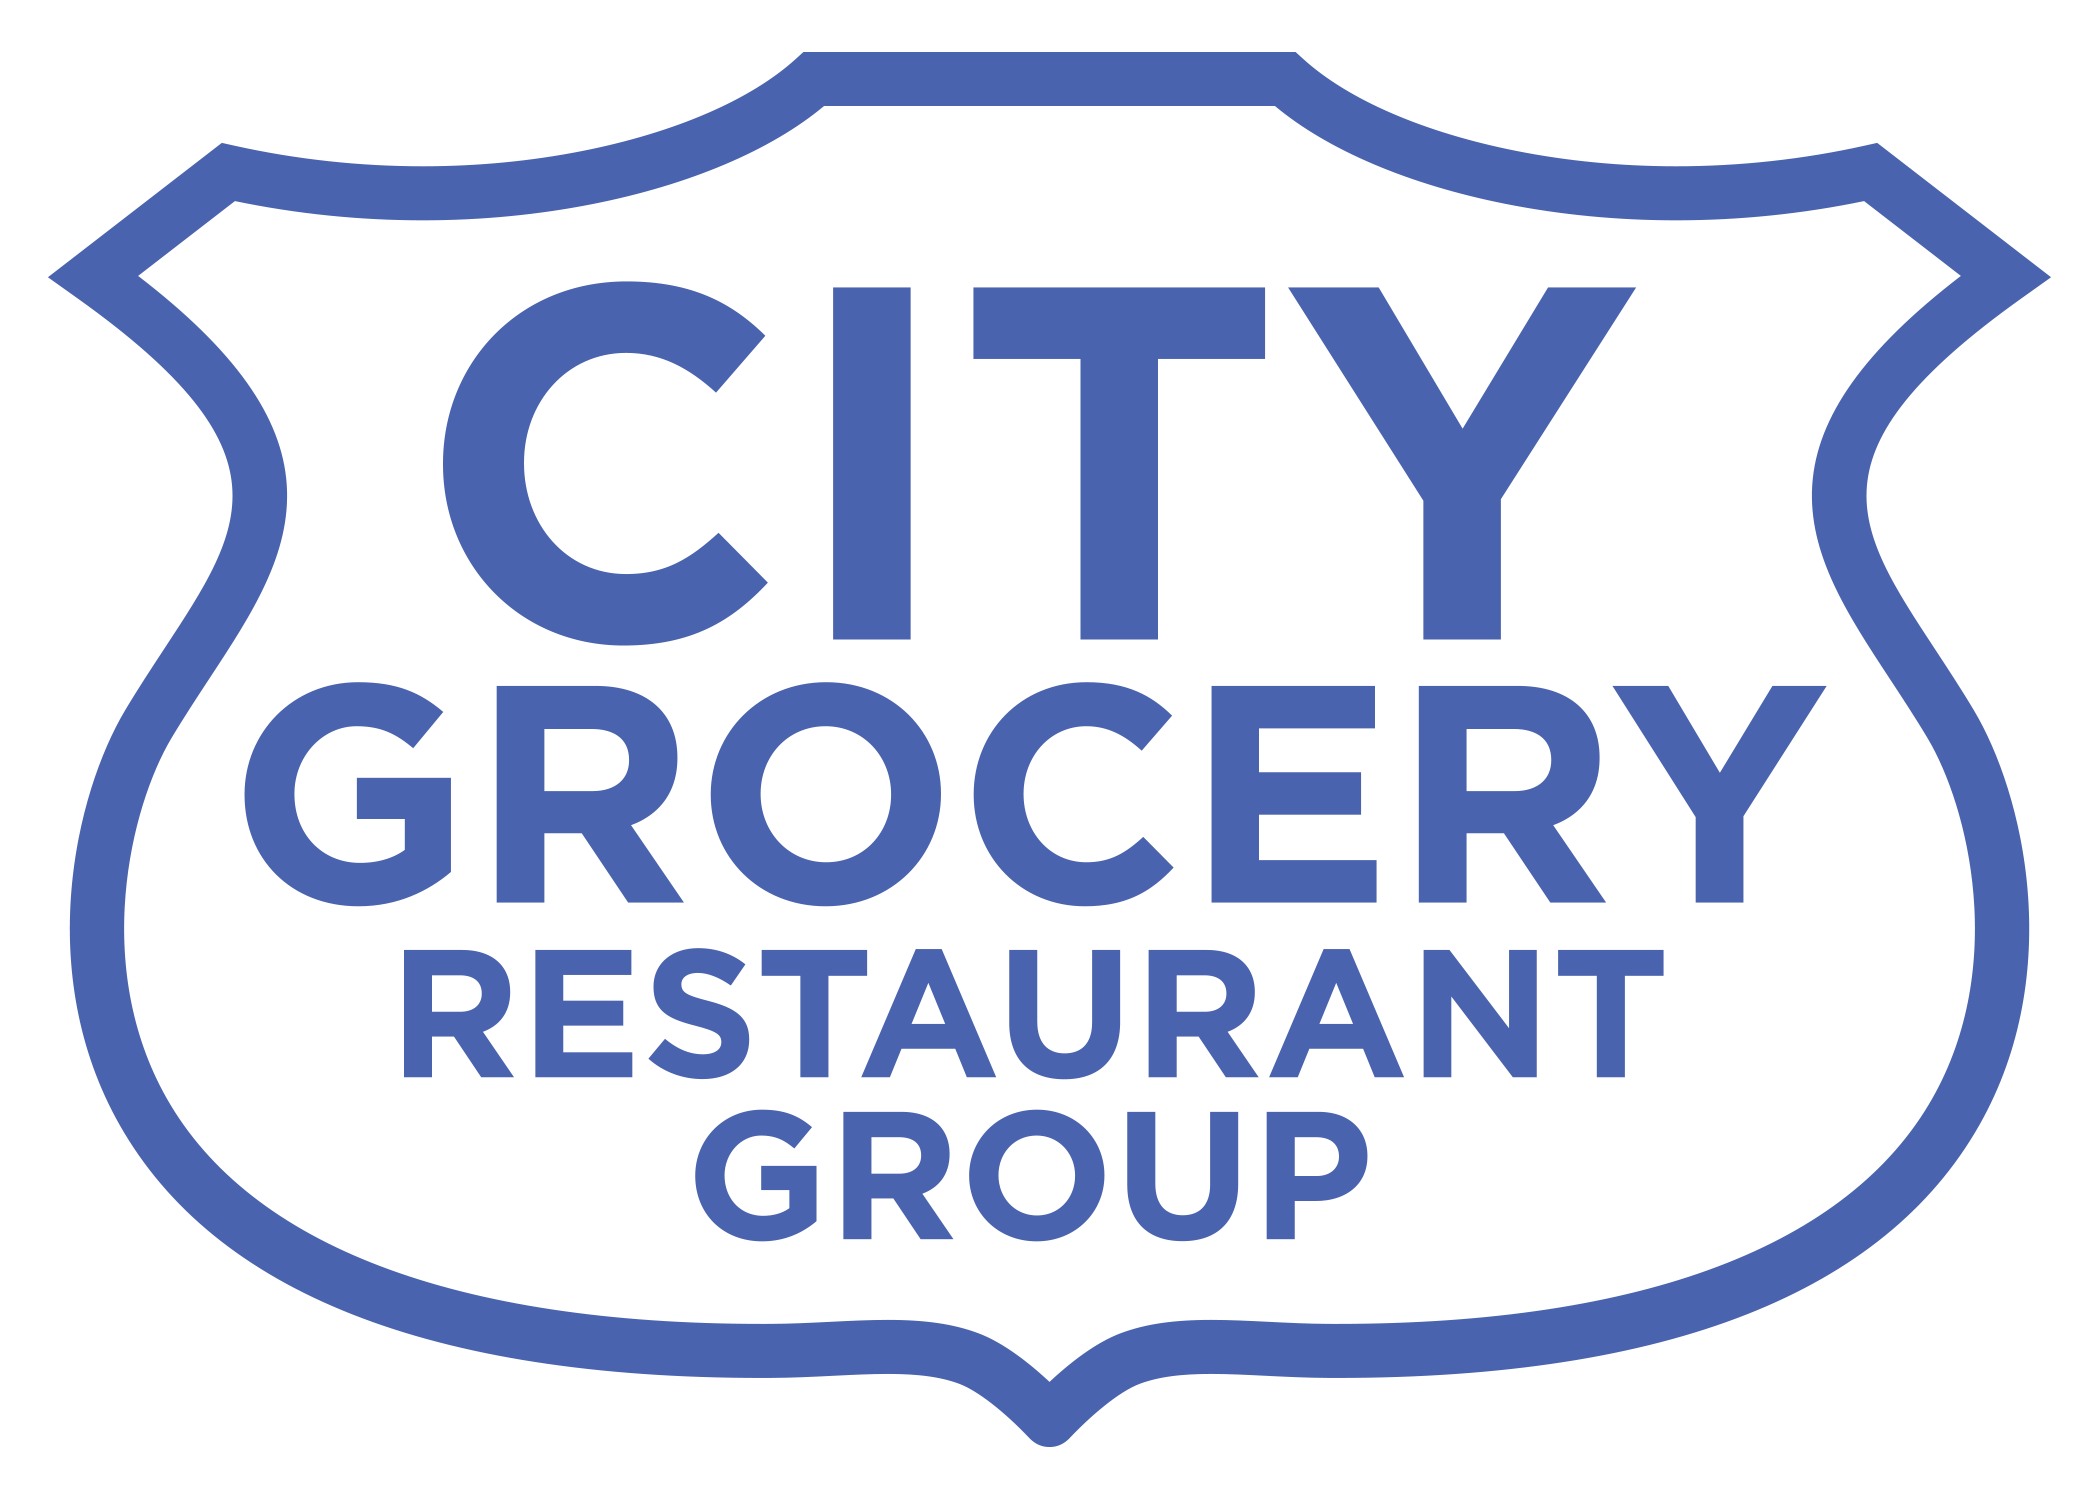 City Grocery Restaurant Group.png